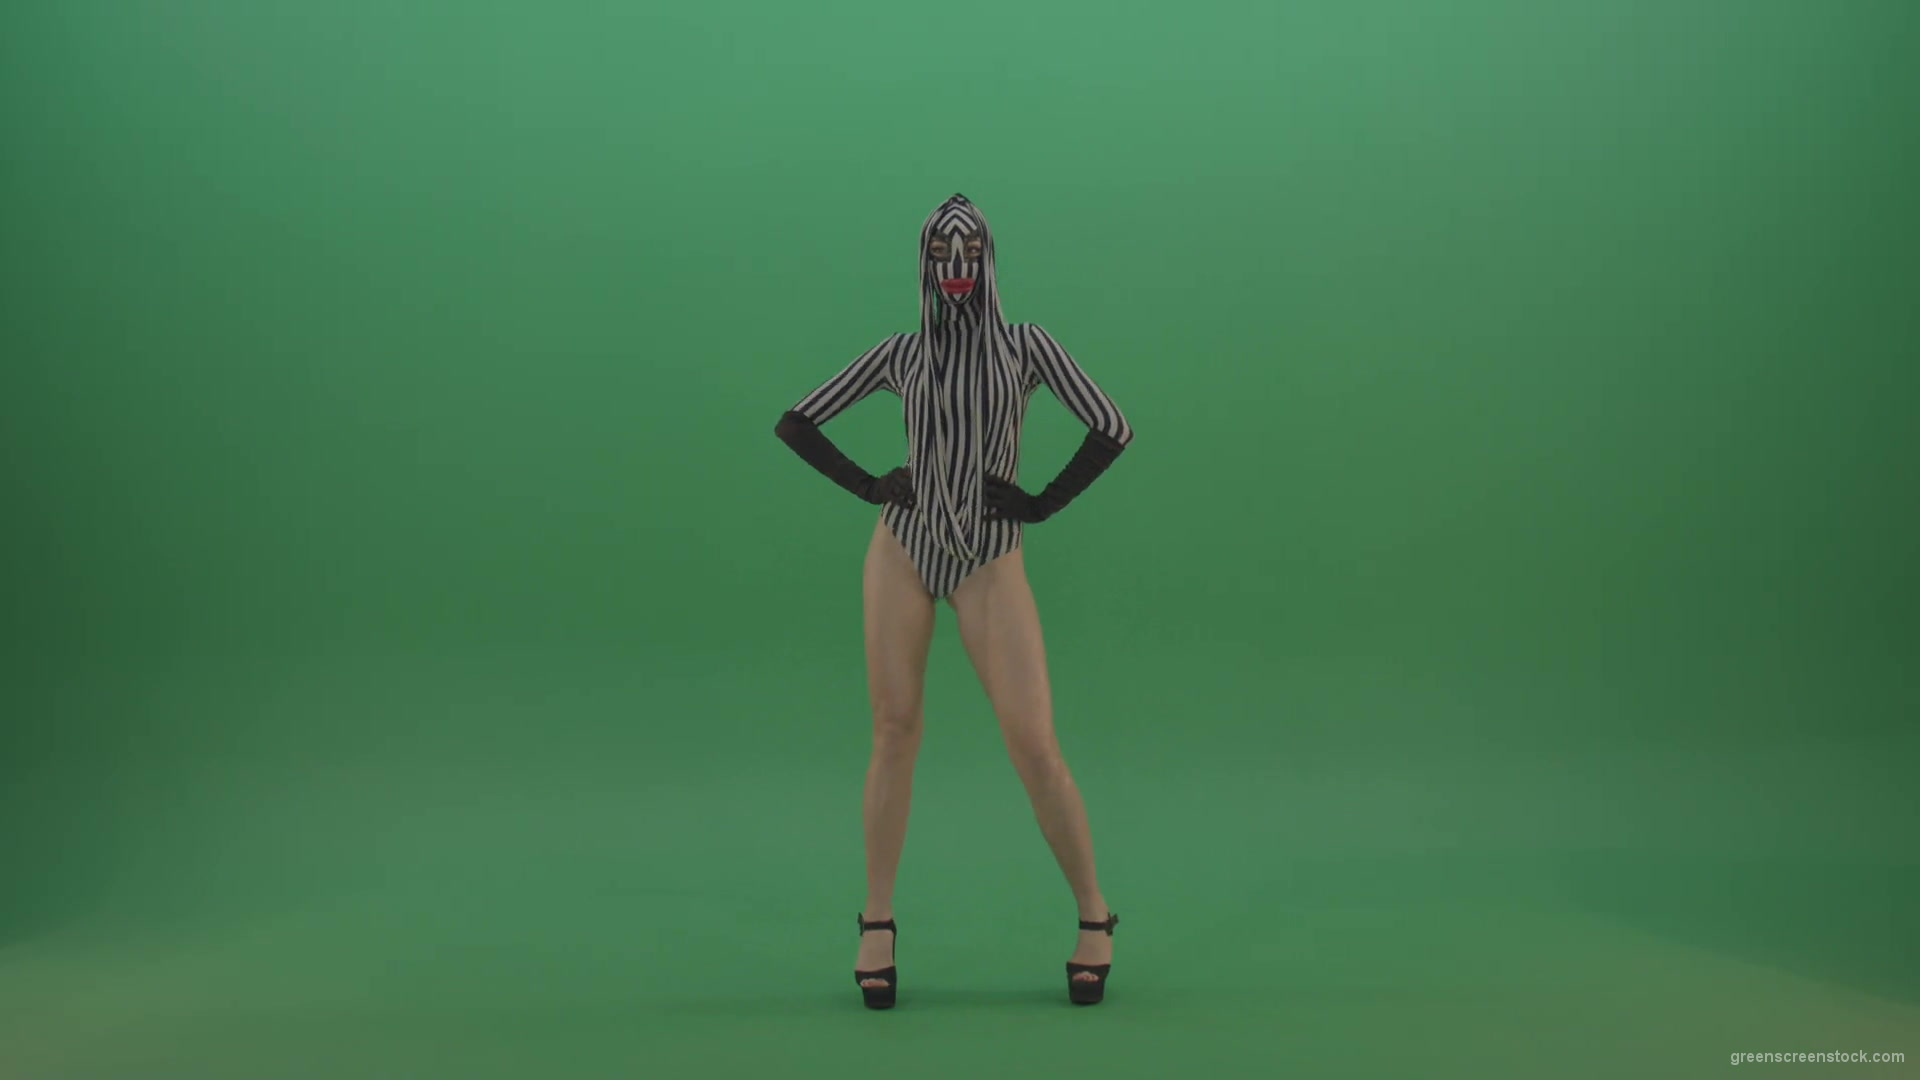 Ass-shake-beats-by-edm-go-go-girl-dance-isolated-on-green-screen-1920_004 Green Screen Stock